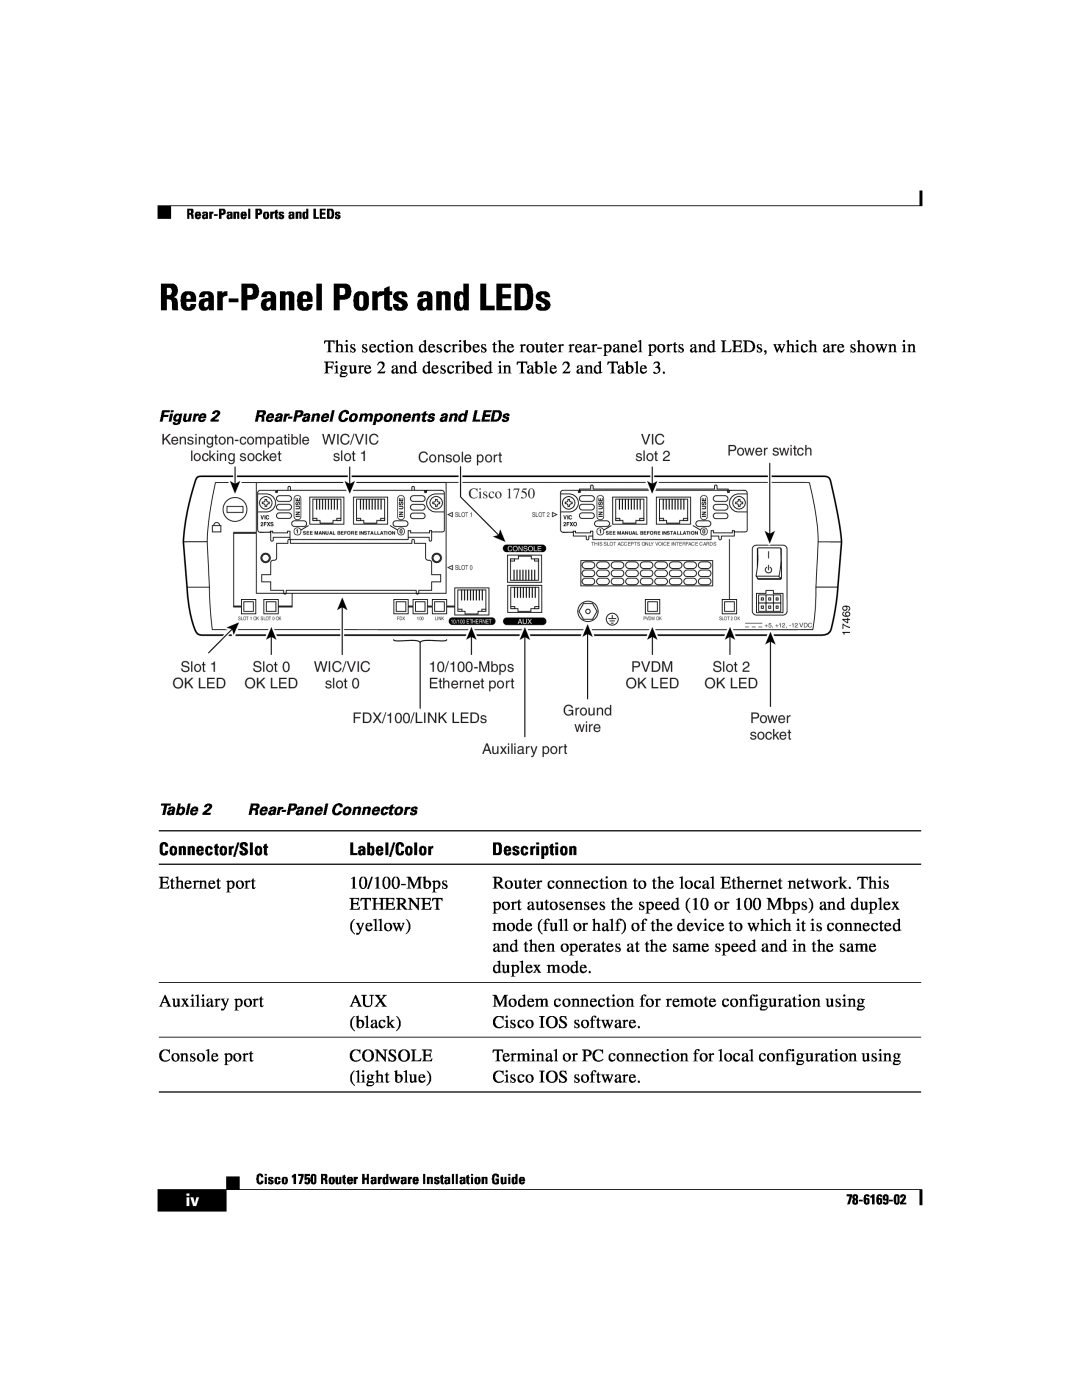 Cisco Systems CISCO1750 manual Rear-Panel Ports and LEDs, Rear-Panel Connectors 